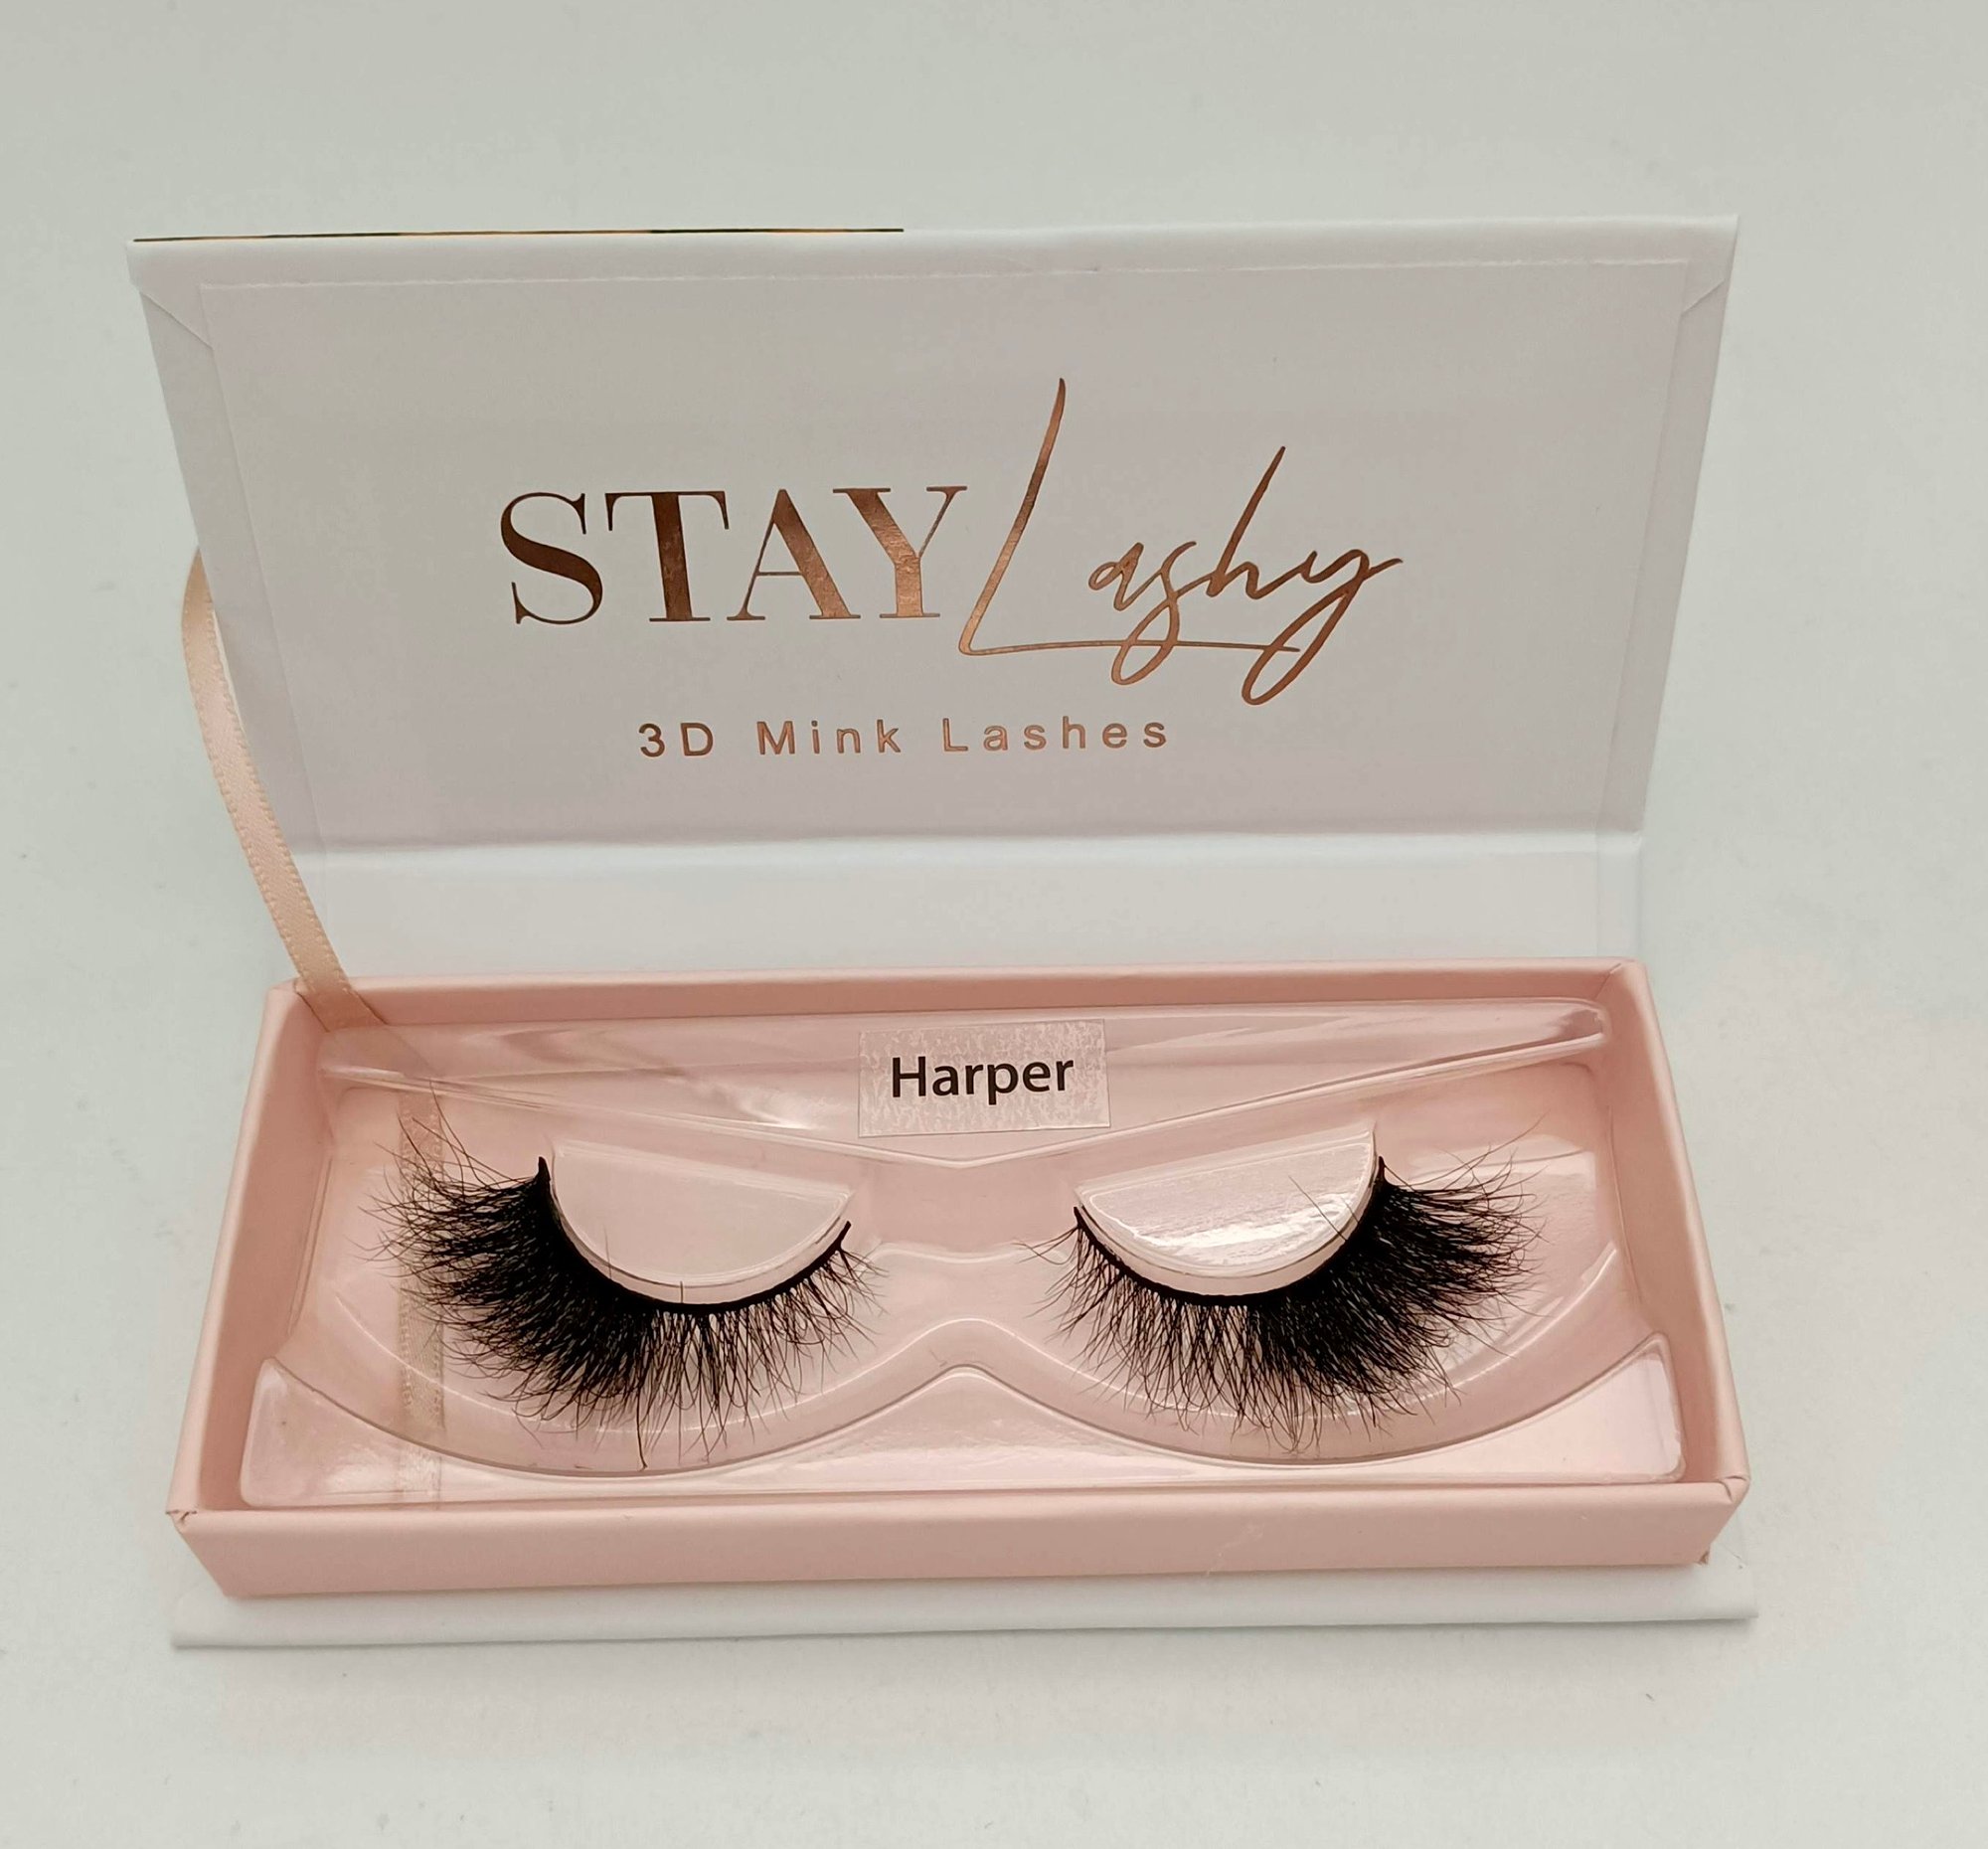 Image of Harper "3D Mink" Lashes by Stay Lashy 